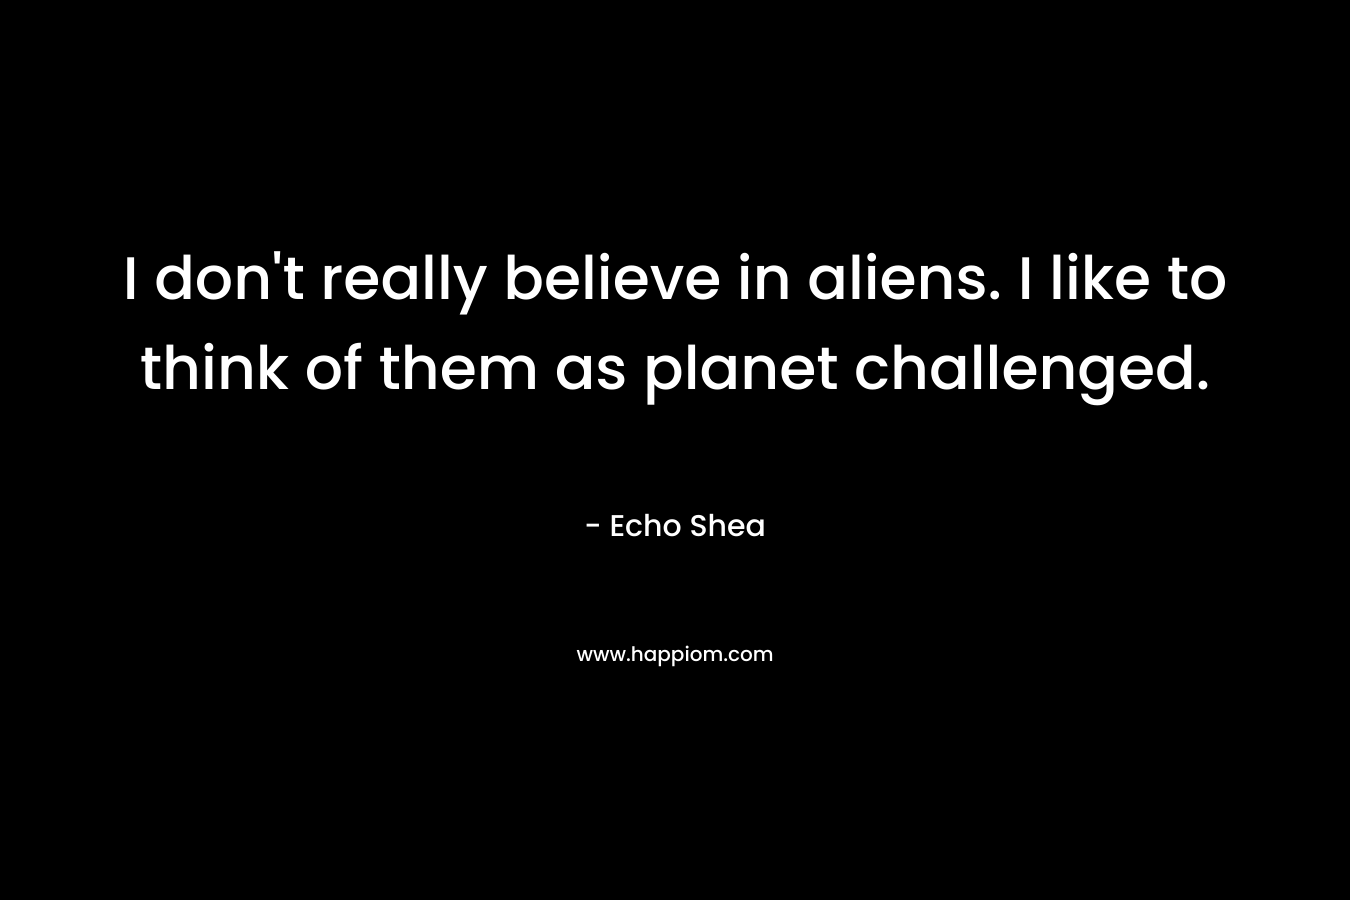 I don't really believe in aliens. I like to think of them as planet challenged.